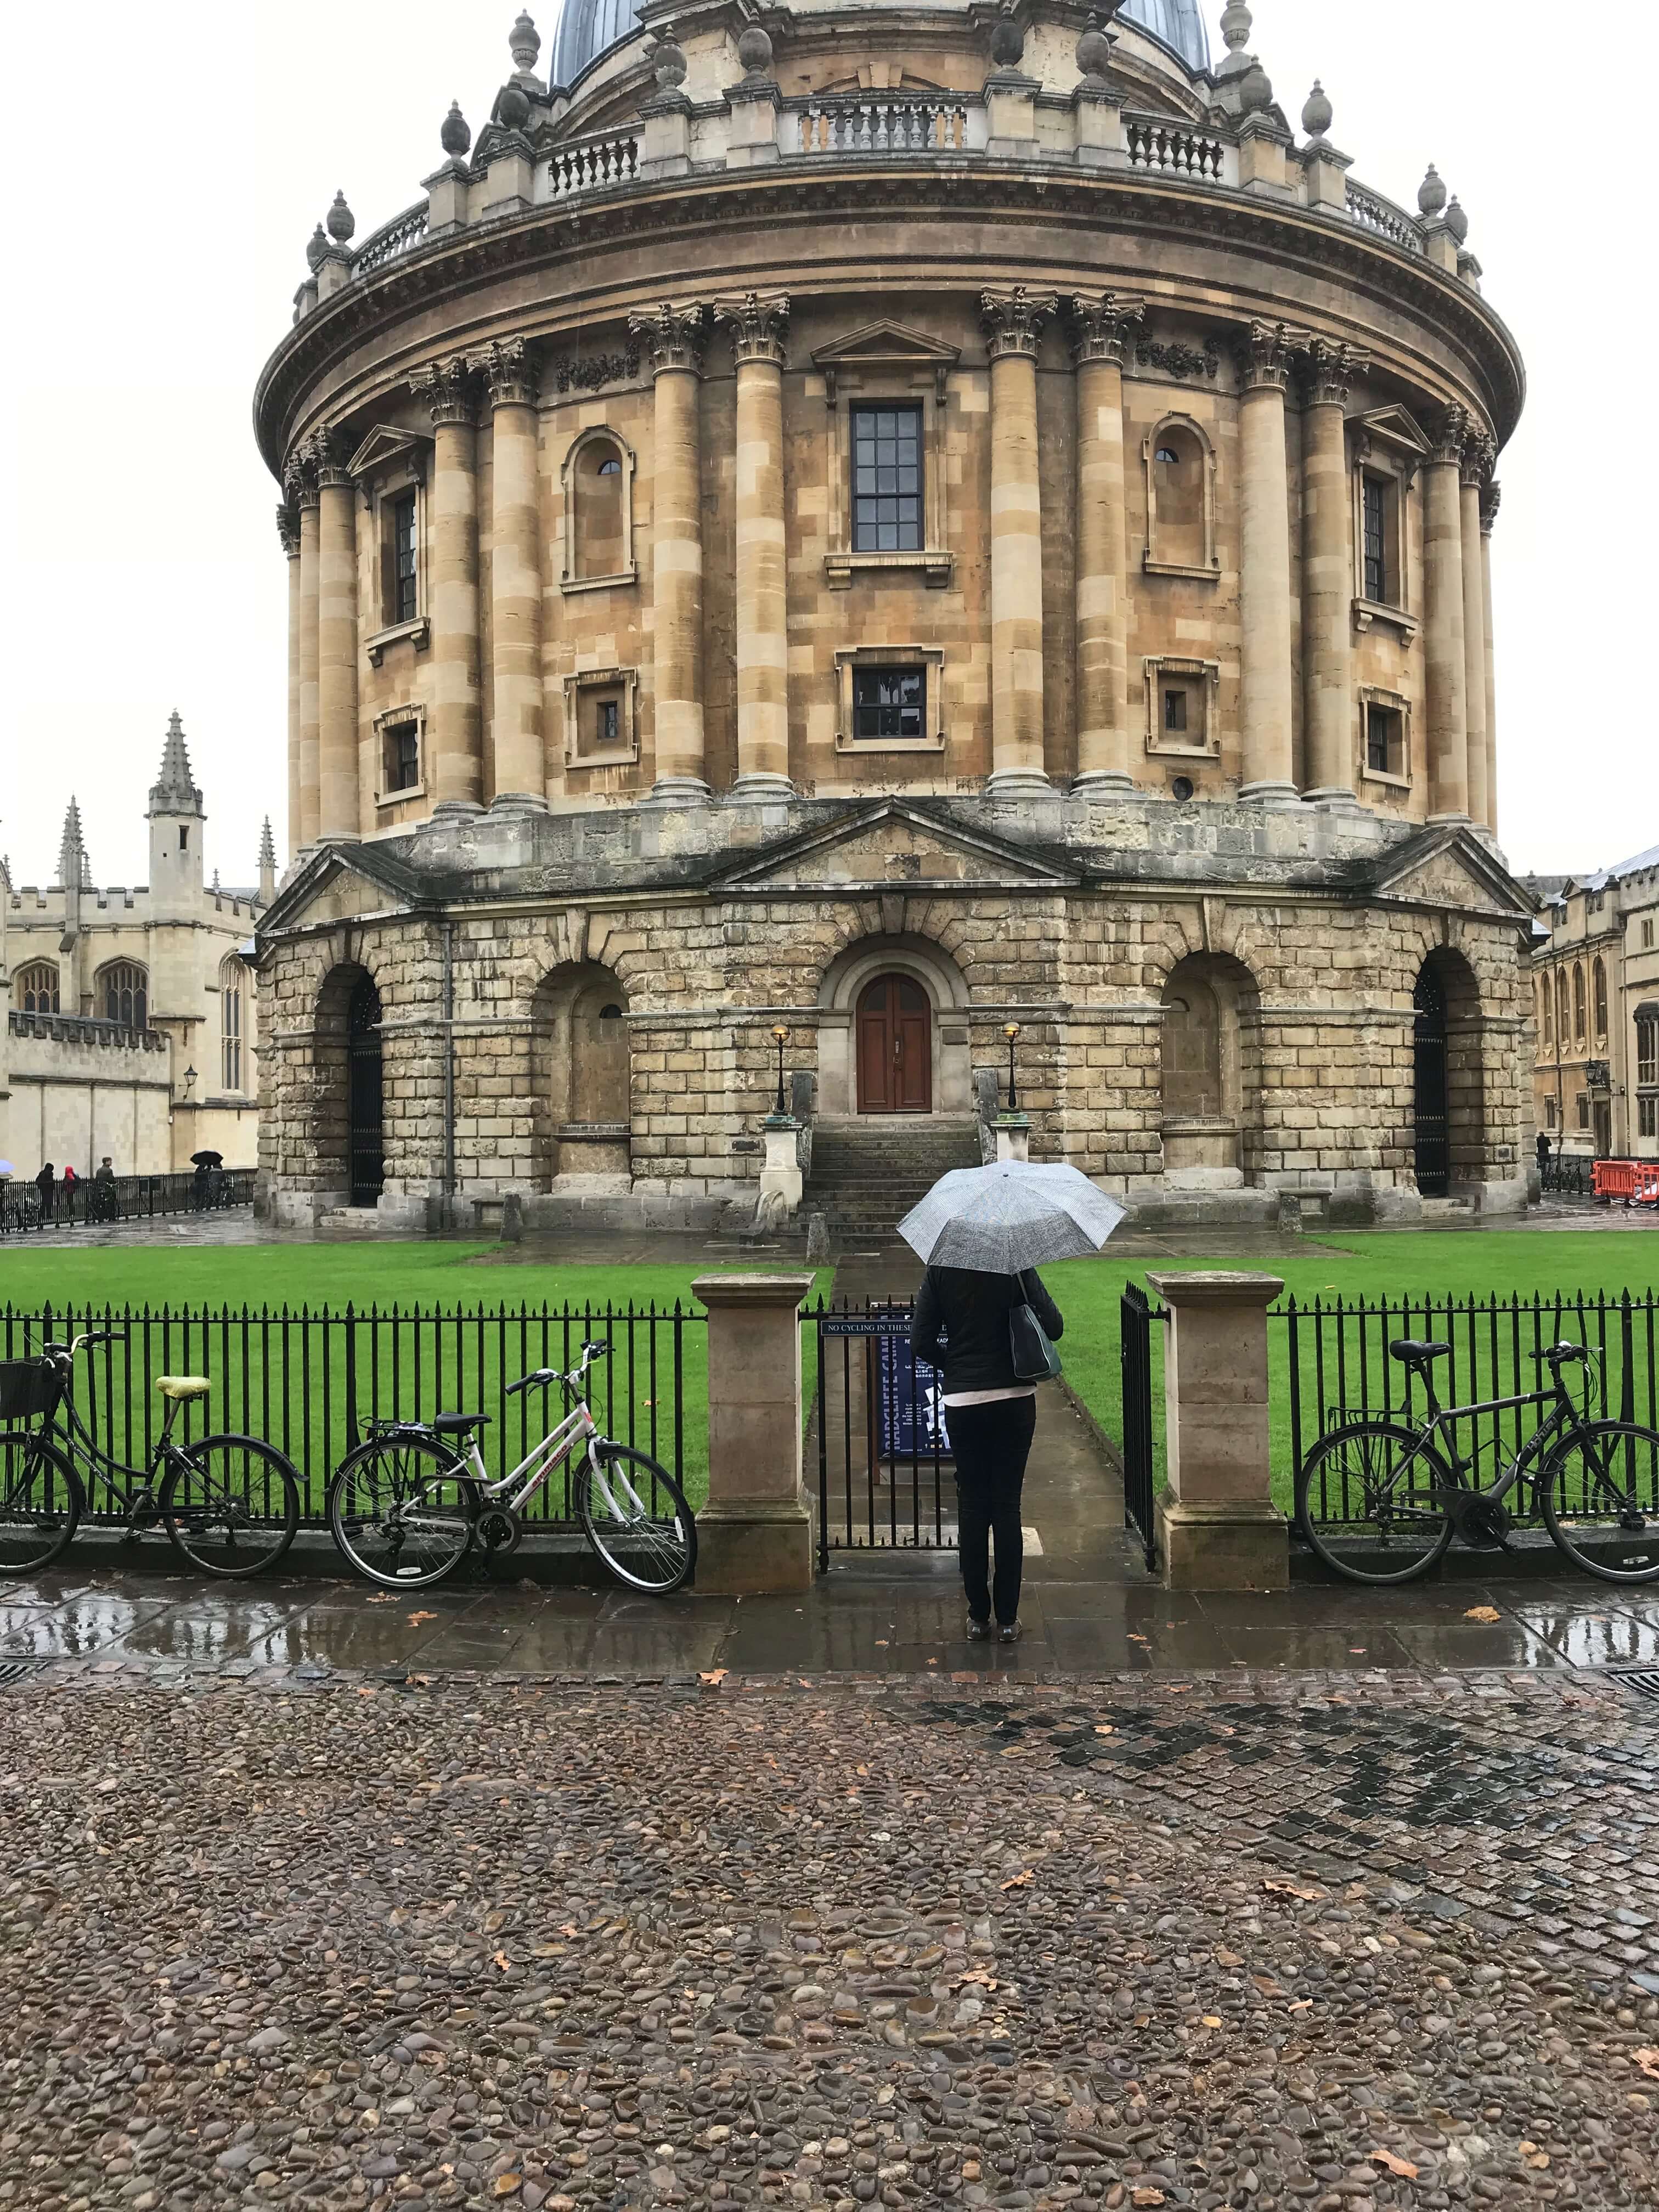 How to spend a rainy day in Oxford, England